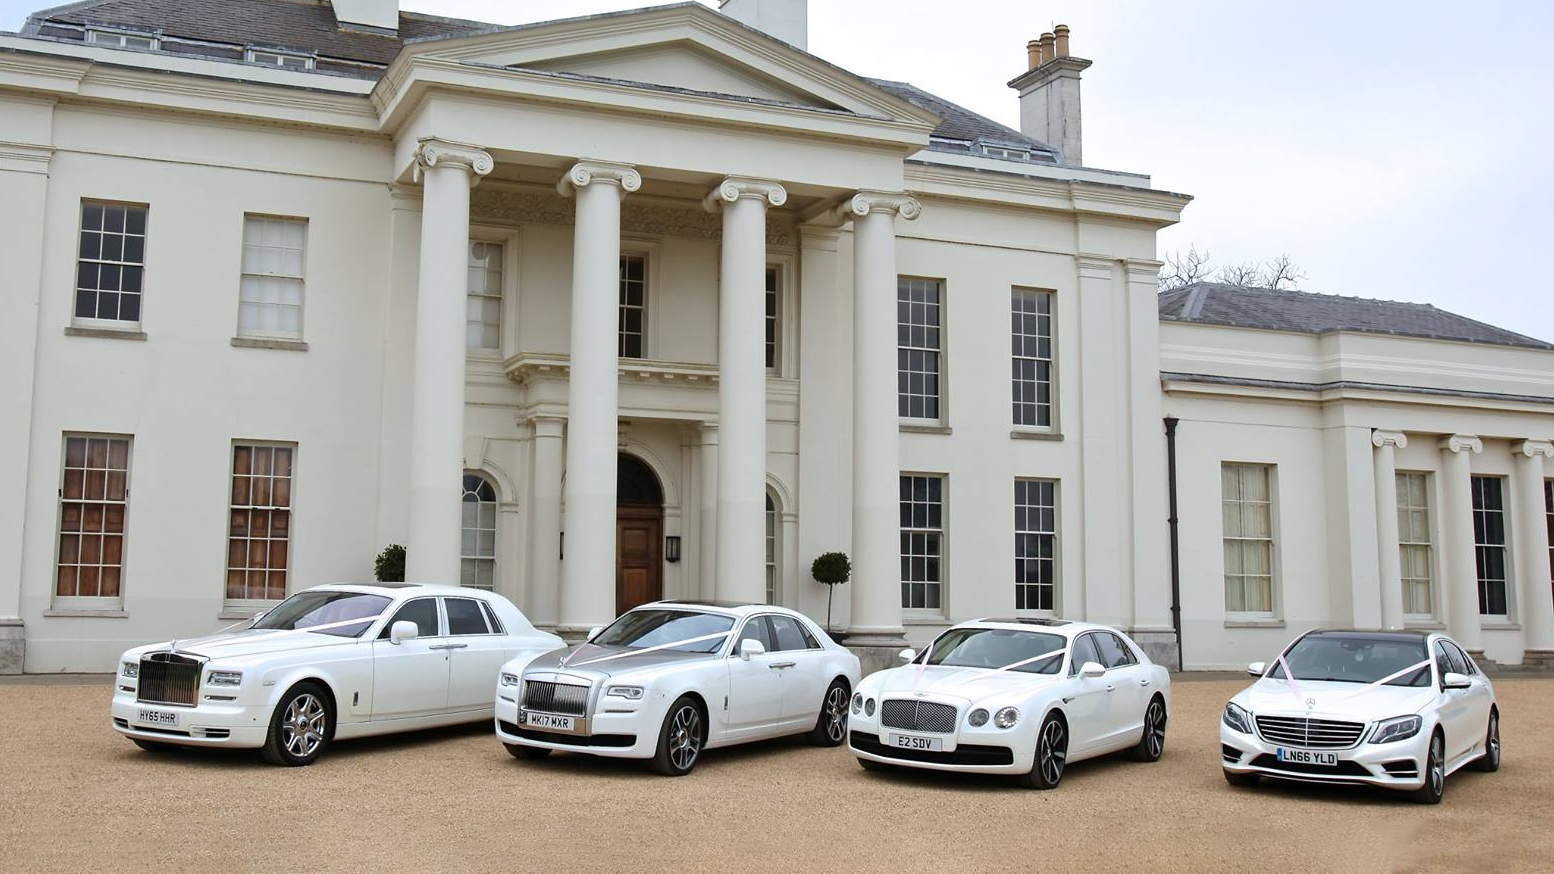 A selection of white Luxurious and modern vehicles all decorated with matching white ribbons on wedding duties in Dunstable. Frot Left to right: Rolls-Royce Phantom, Rolls-Royce Gh